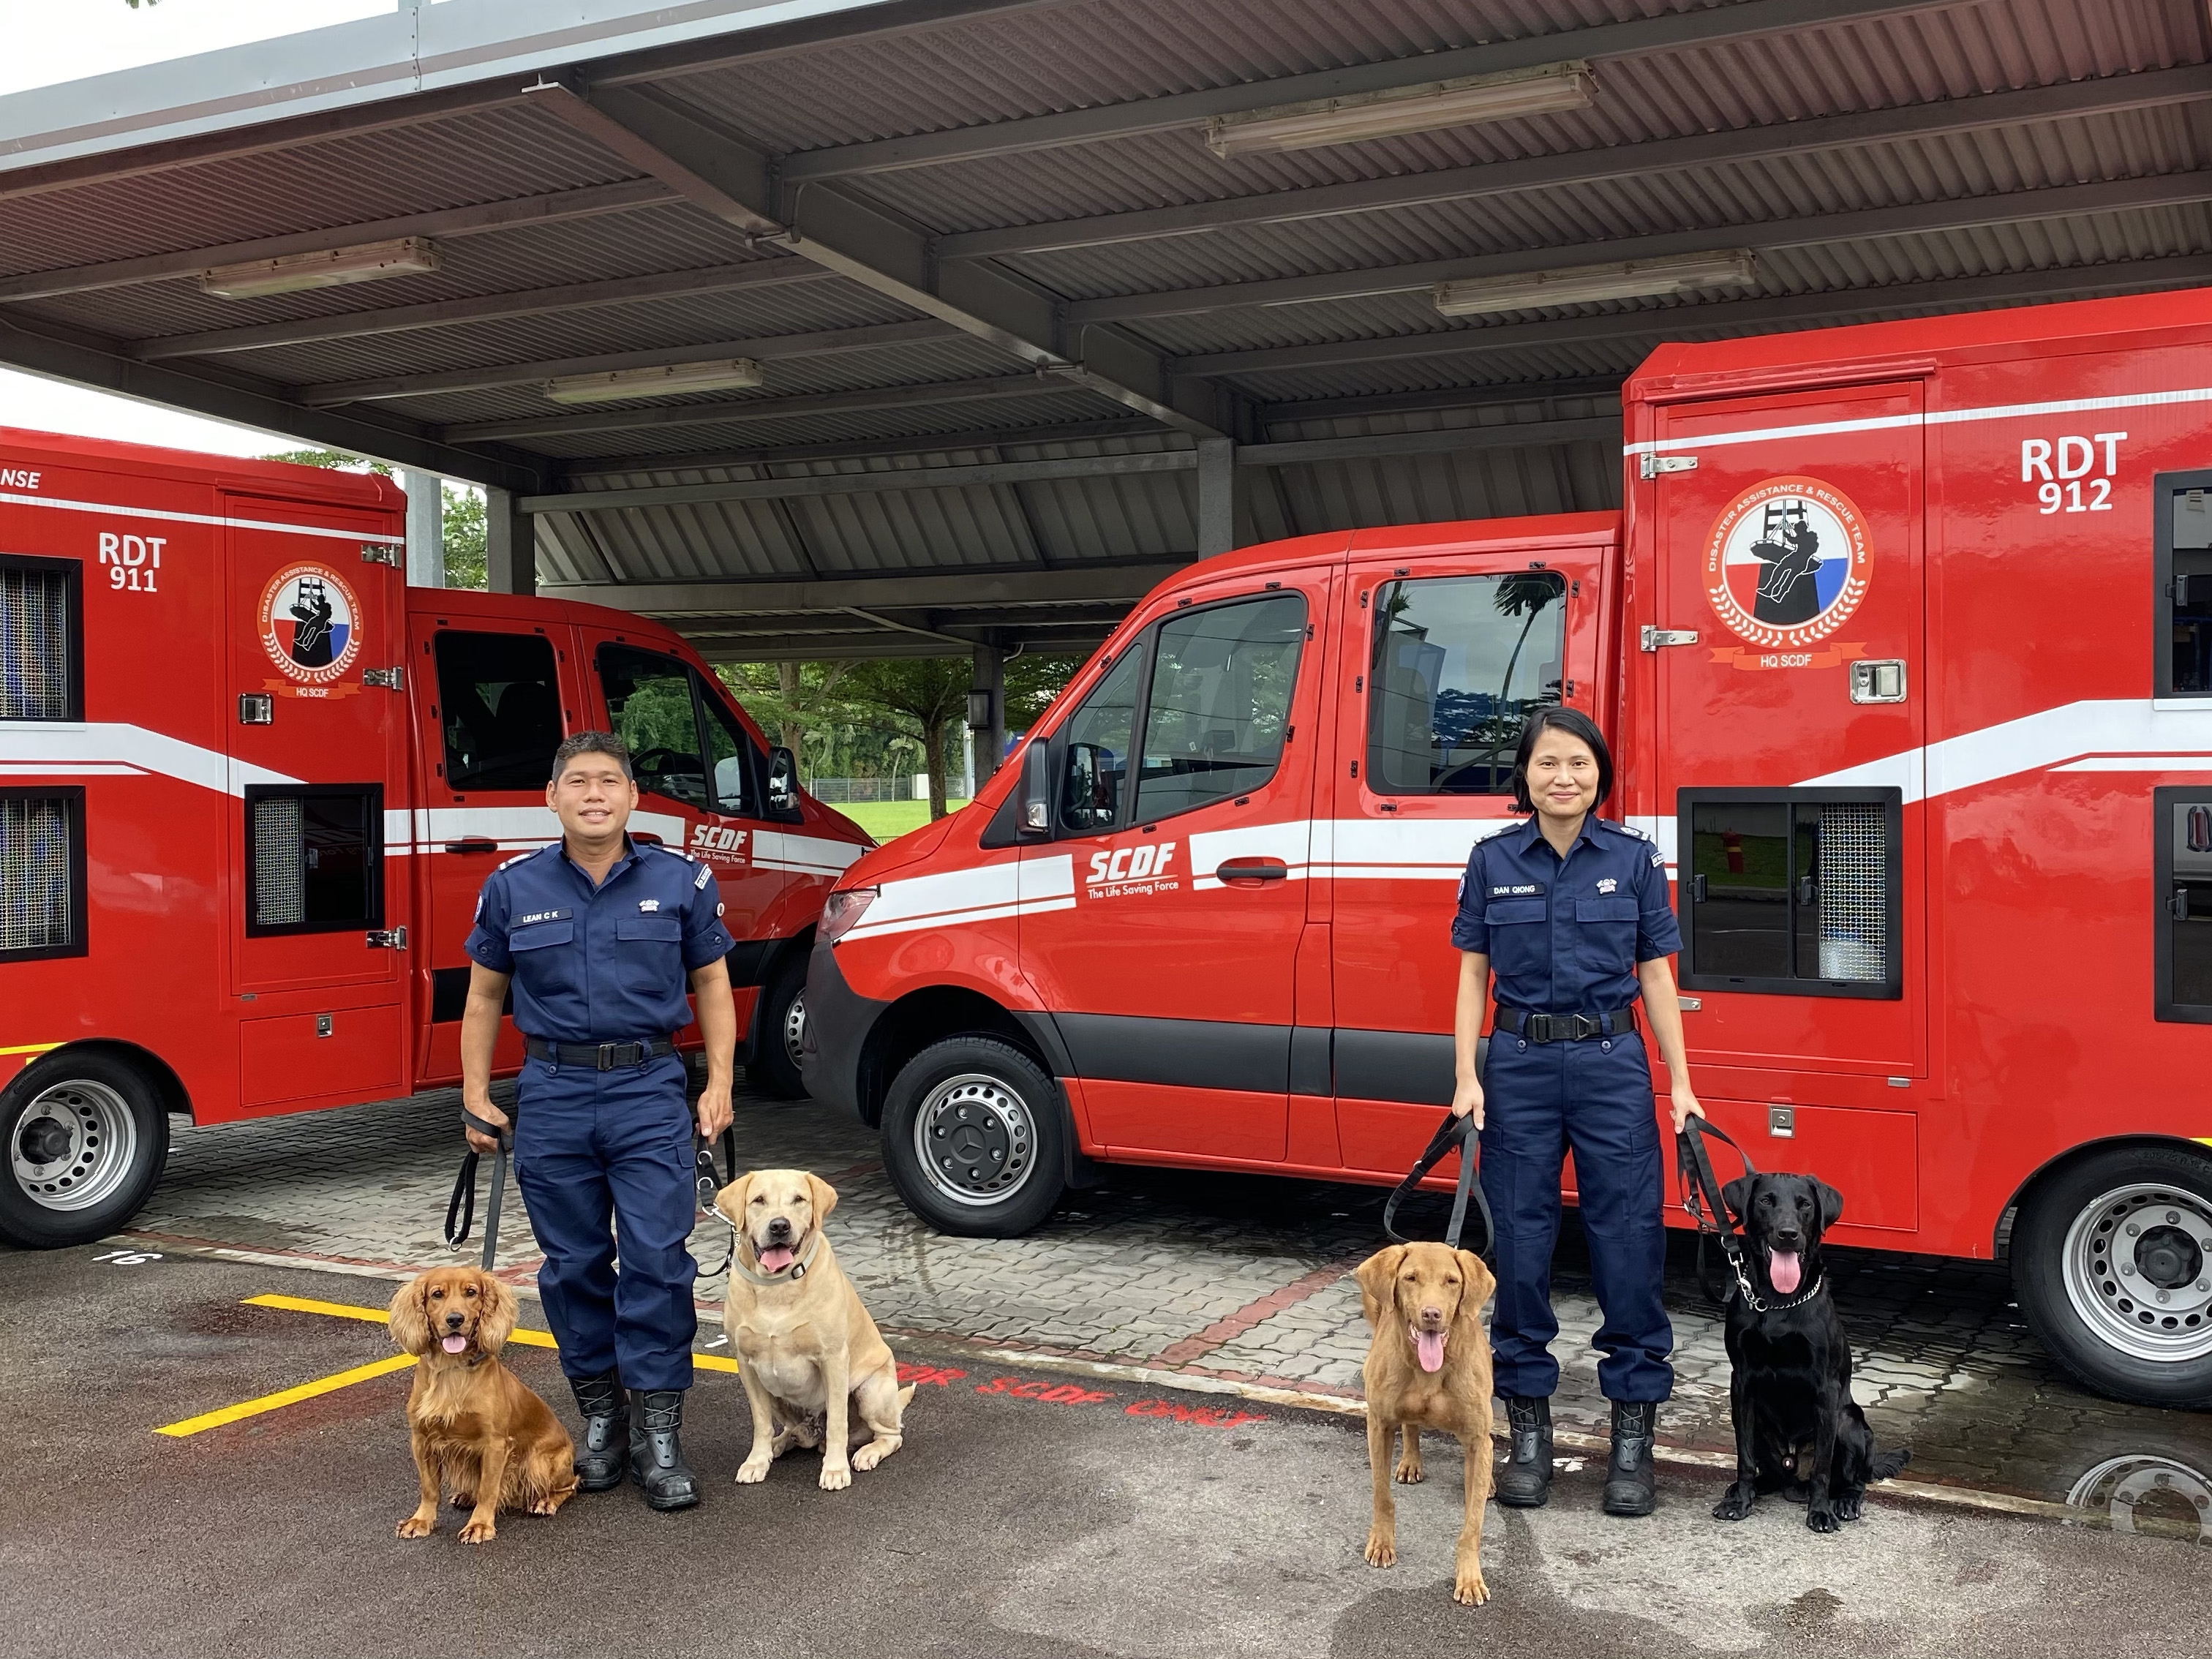 Warrant Officers, WO2 Lean Chee Keat (left) and WO1 Dan Qiong (right), posing for the camera with the Urban Search and Rescue (USAR) Dogs and Fire Investigation (FI) dogs.